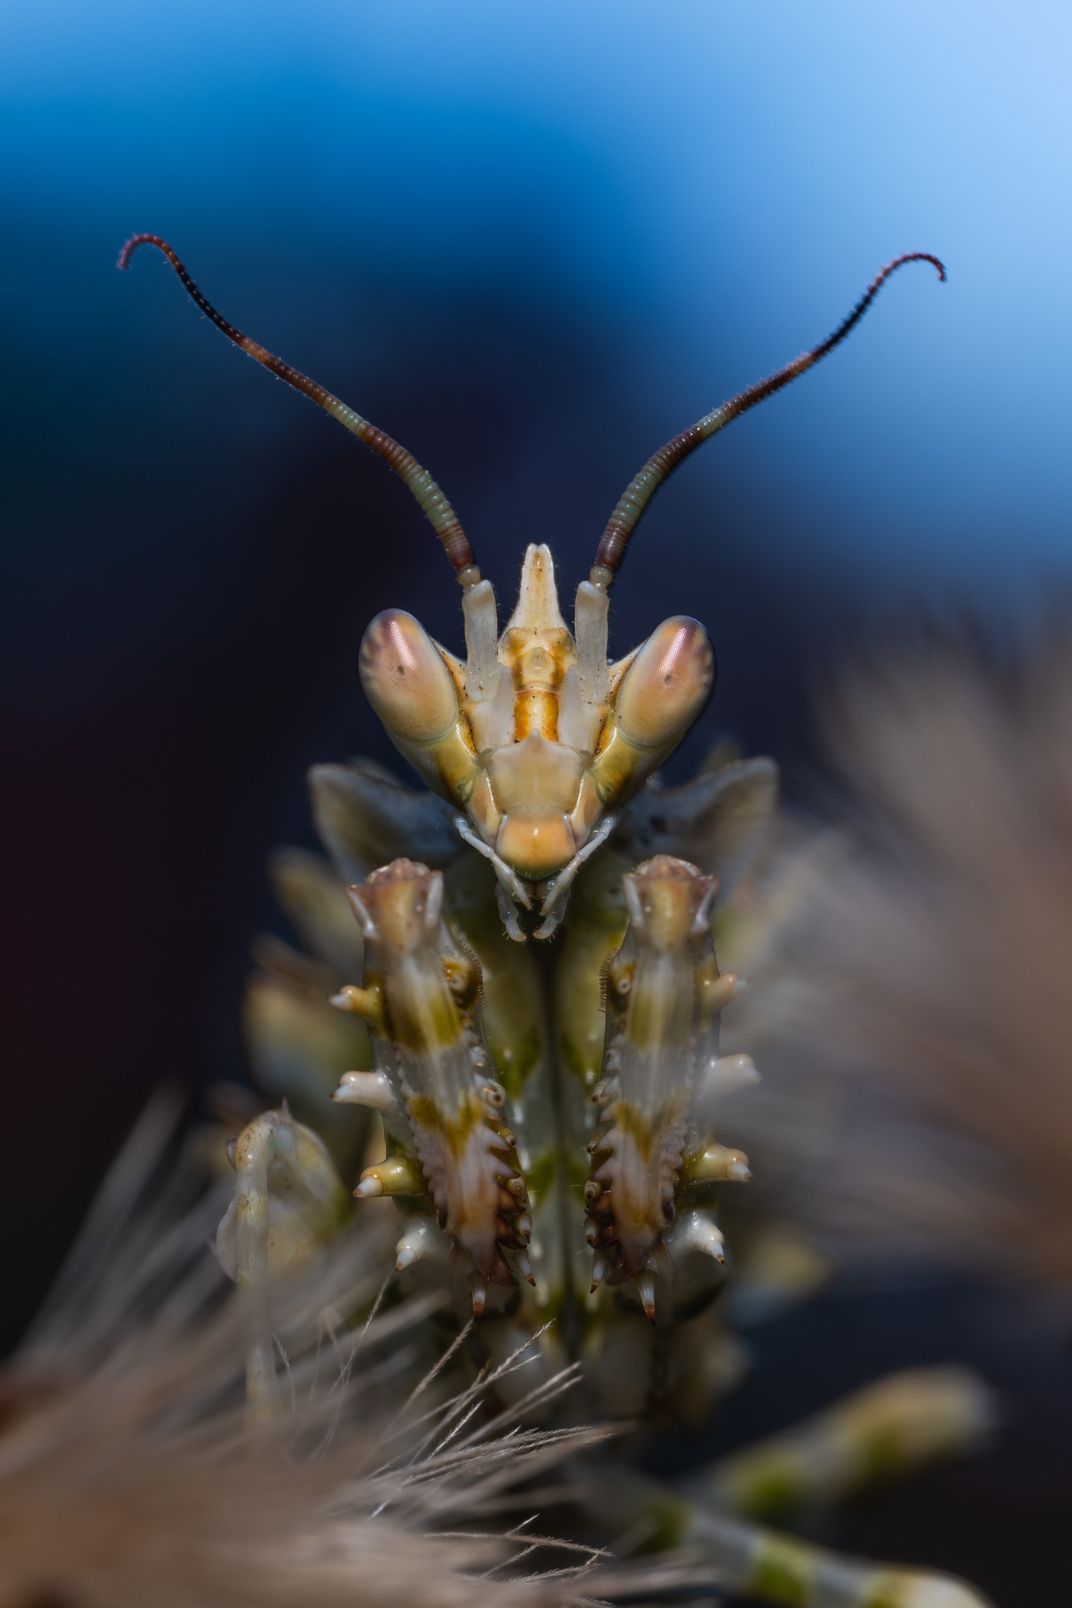 3 - This juvenile flower mantis changes its coloring to match the surrounding flowers.